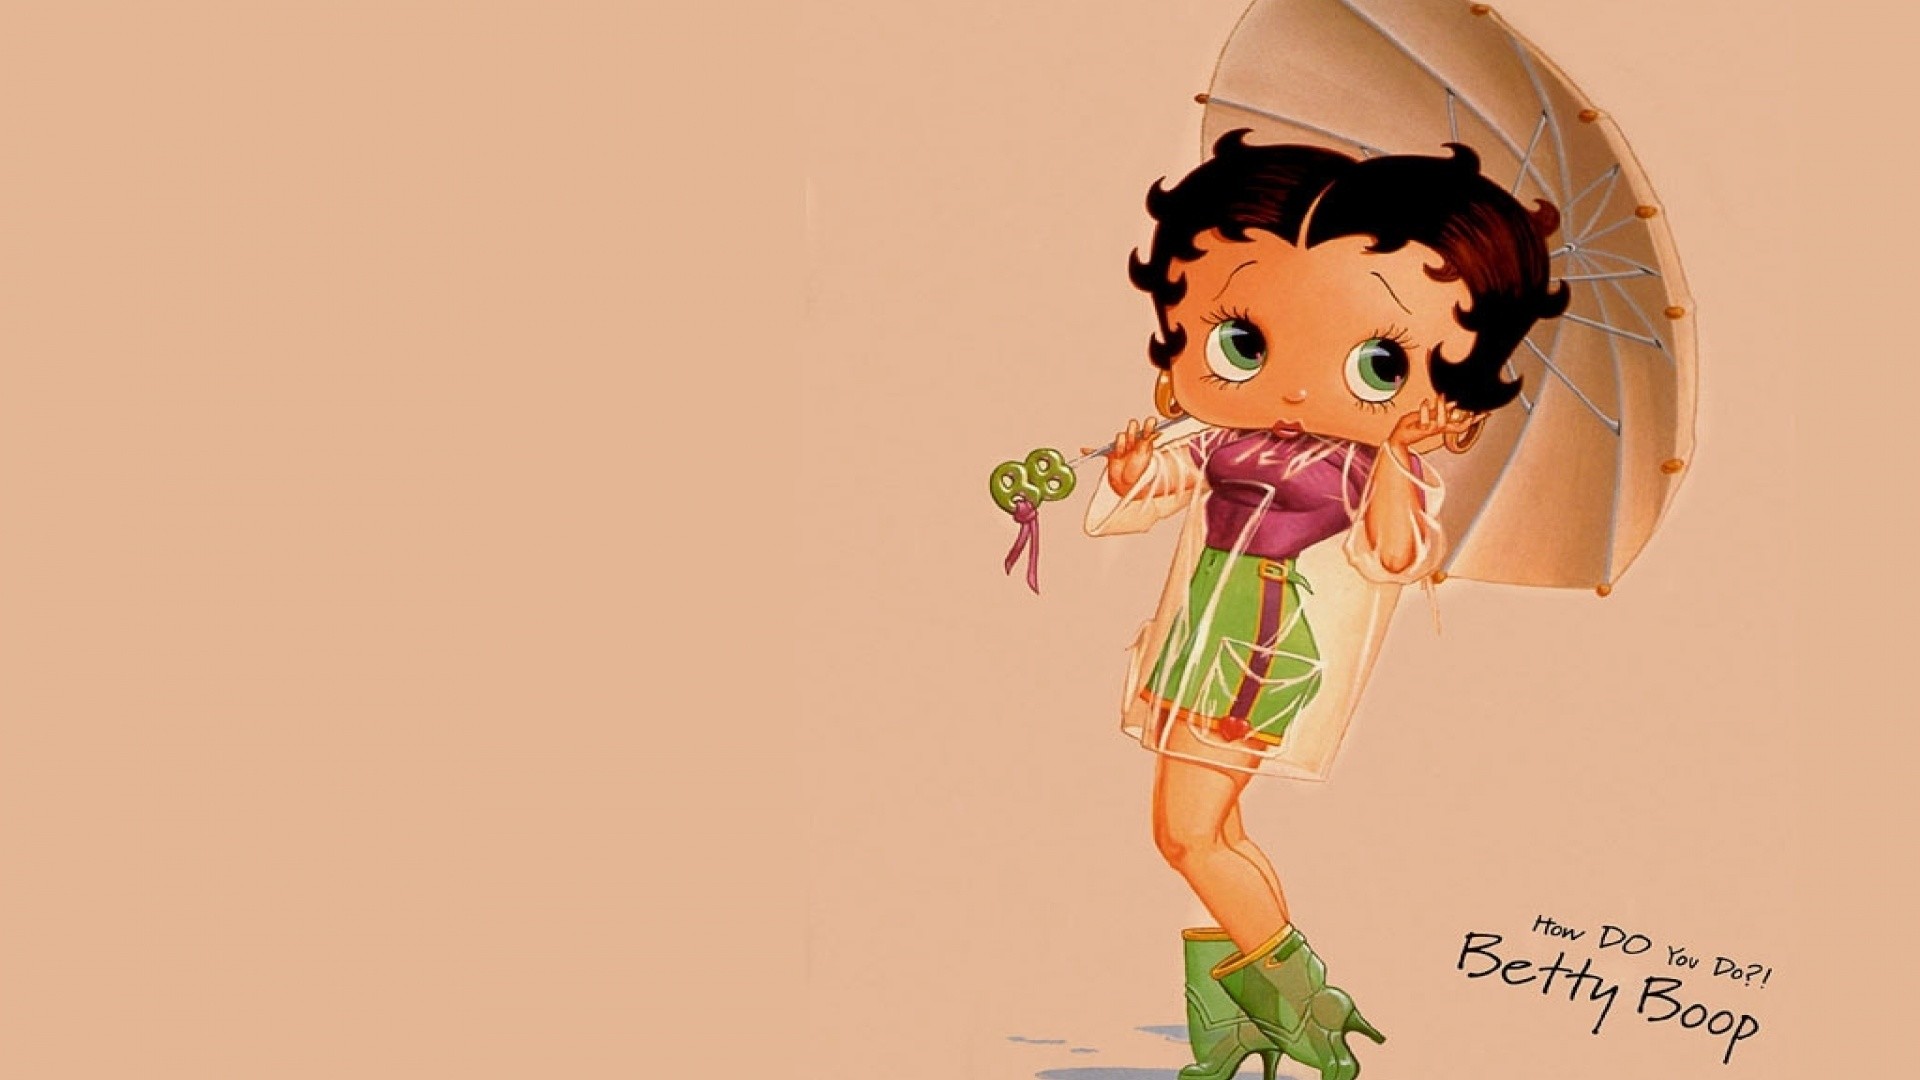 Betty Boop Pictures Archive  For more styles and sizes of FREE Betty Boop  Cell  Mobile Phone Wallpapers go to httpsglitterfillsblogspotcom  Cartoon winking Biker BettyBoop on her motorcycle Dimensions 750 x